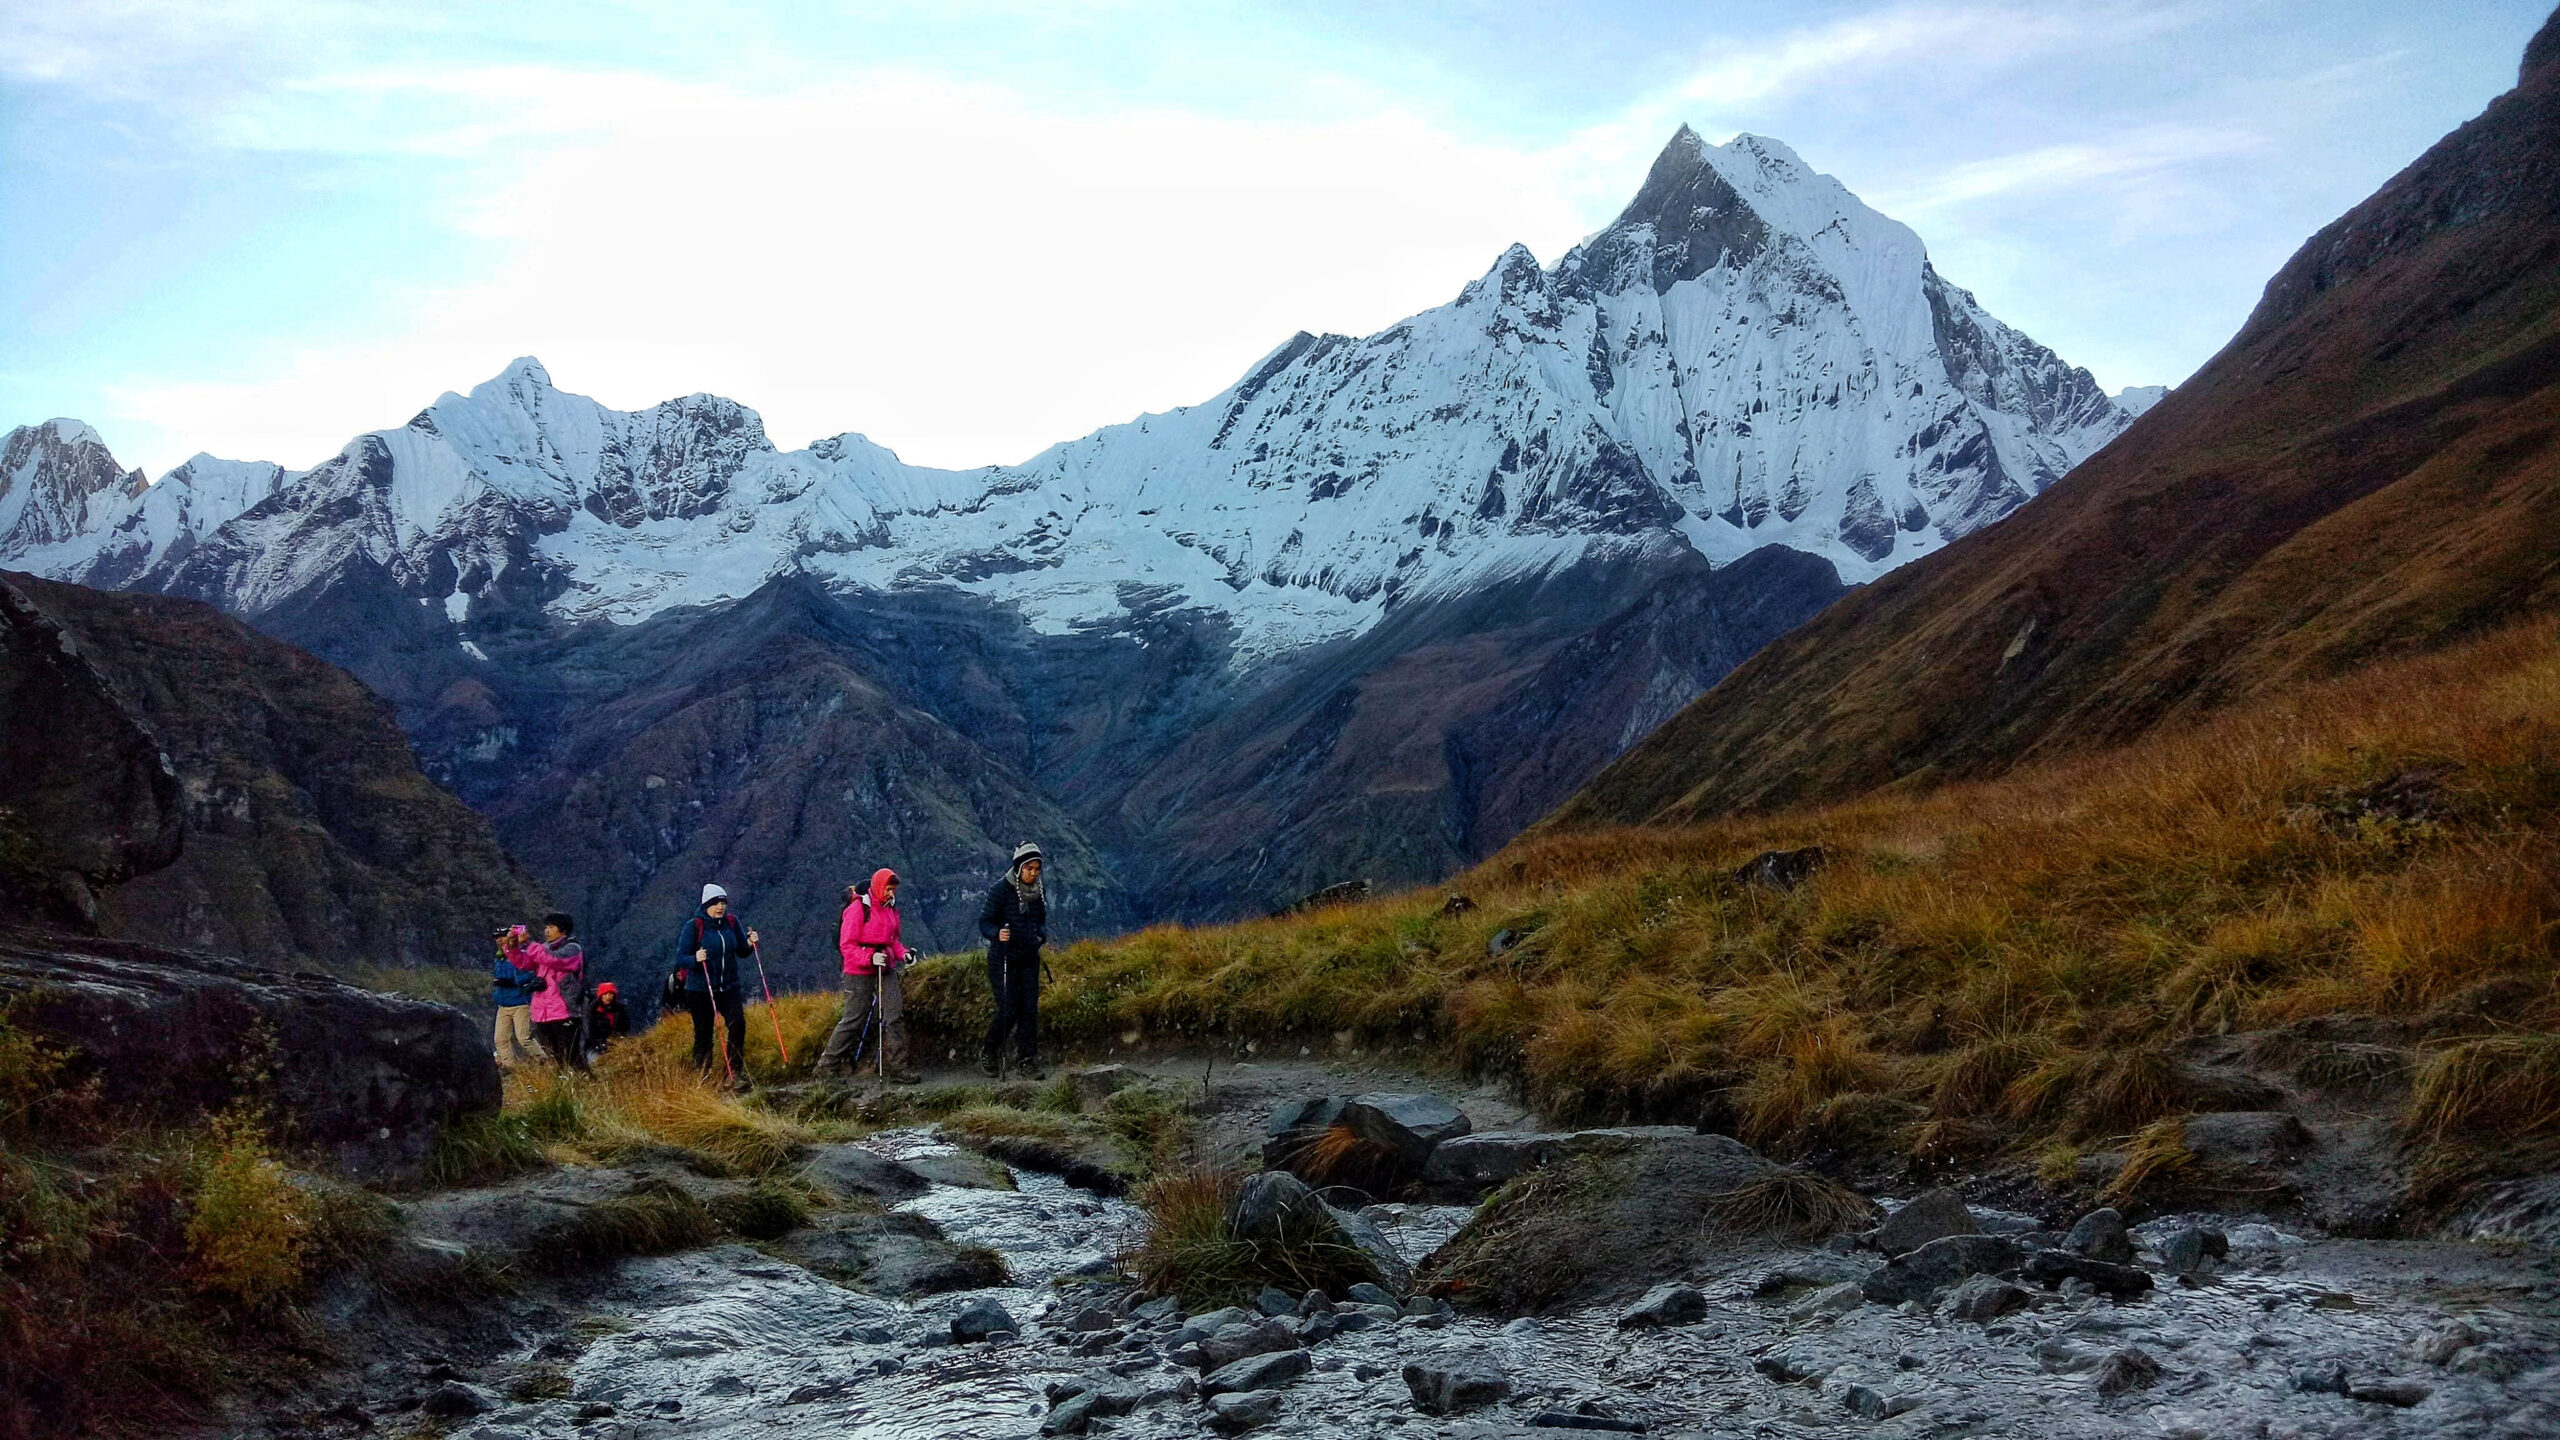 A group of trekkers walk through the famous Annapurna Circuit Trek with Machhapuchhre shining in the background.